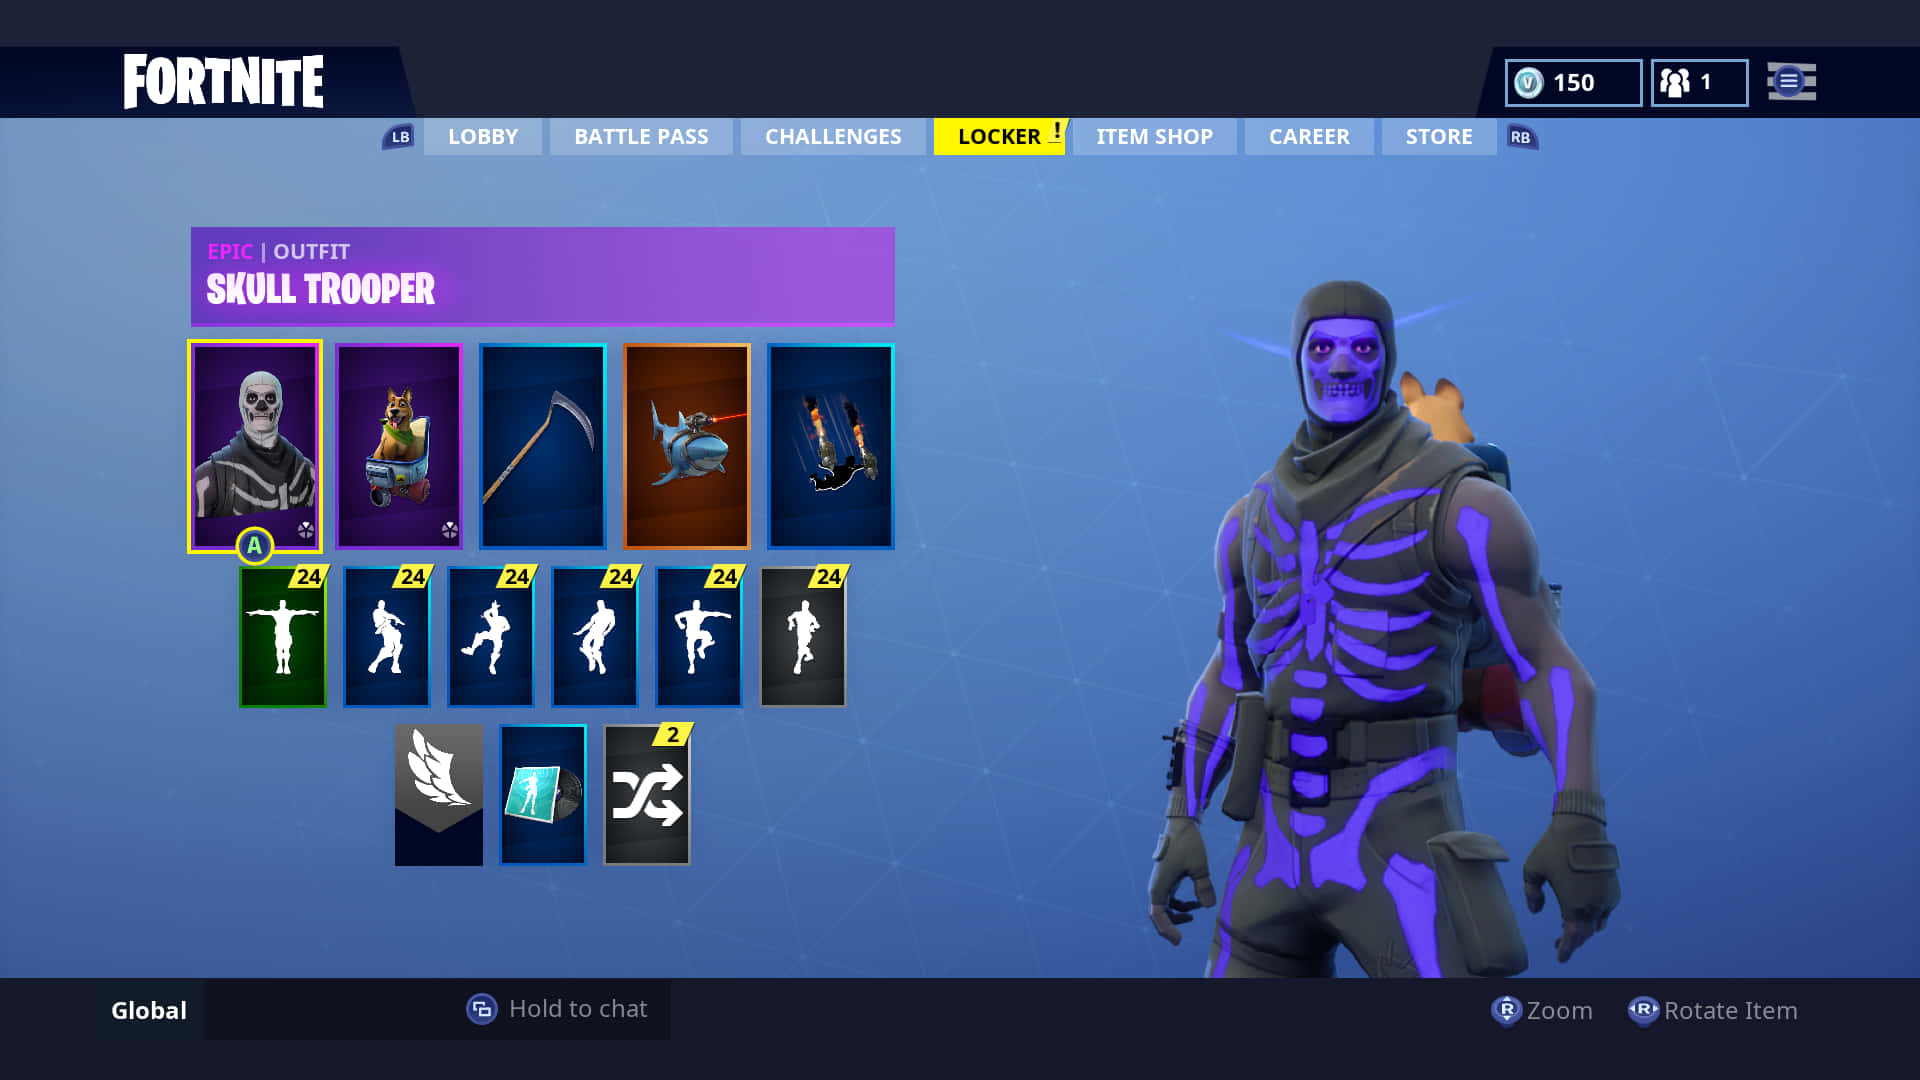 "Be seen in the iconic Purple Skull Trooper skin with the exclusive Fortnite look." Wallpaper